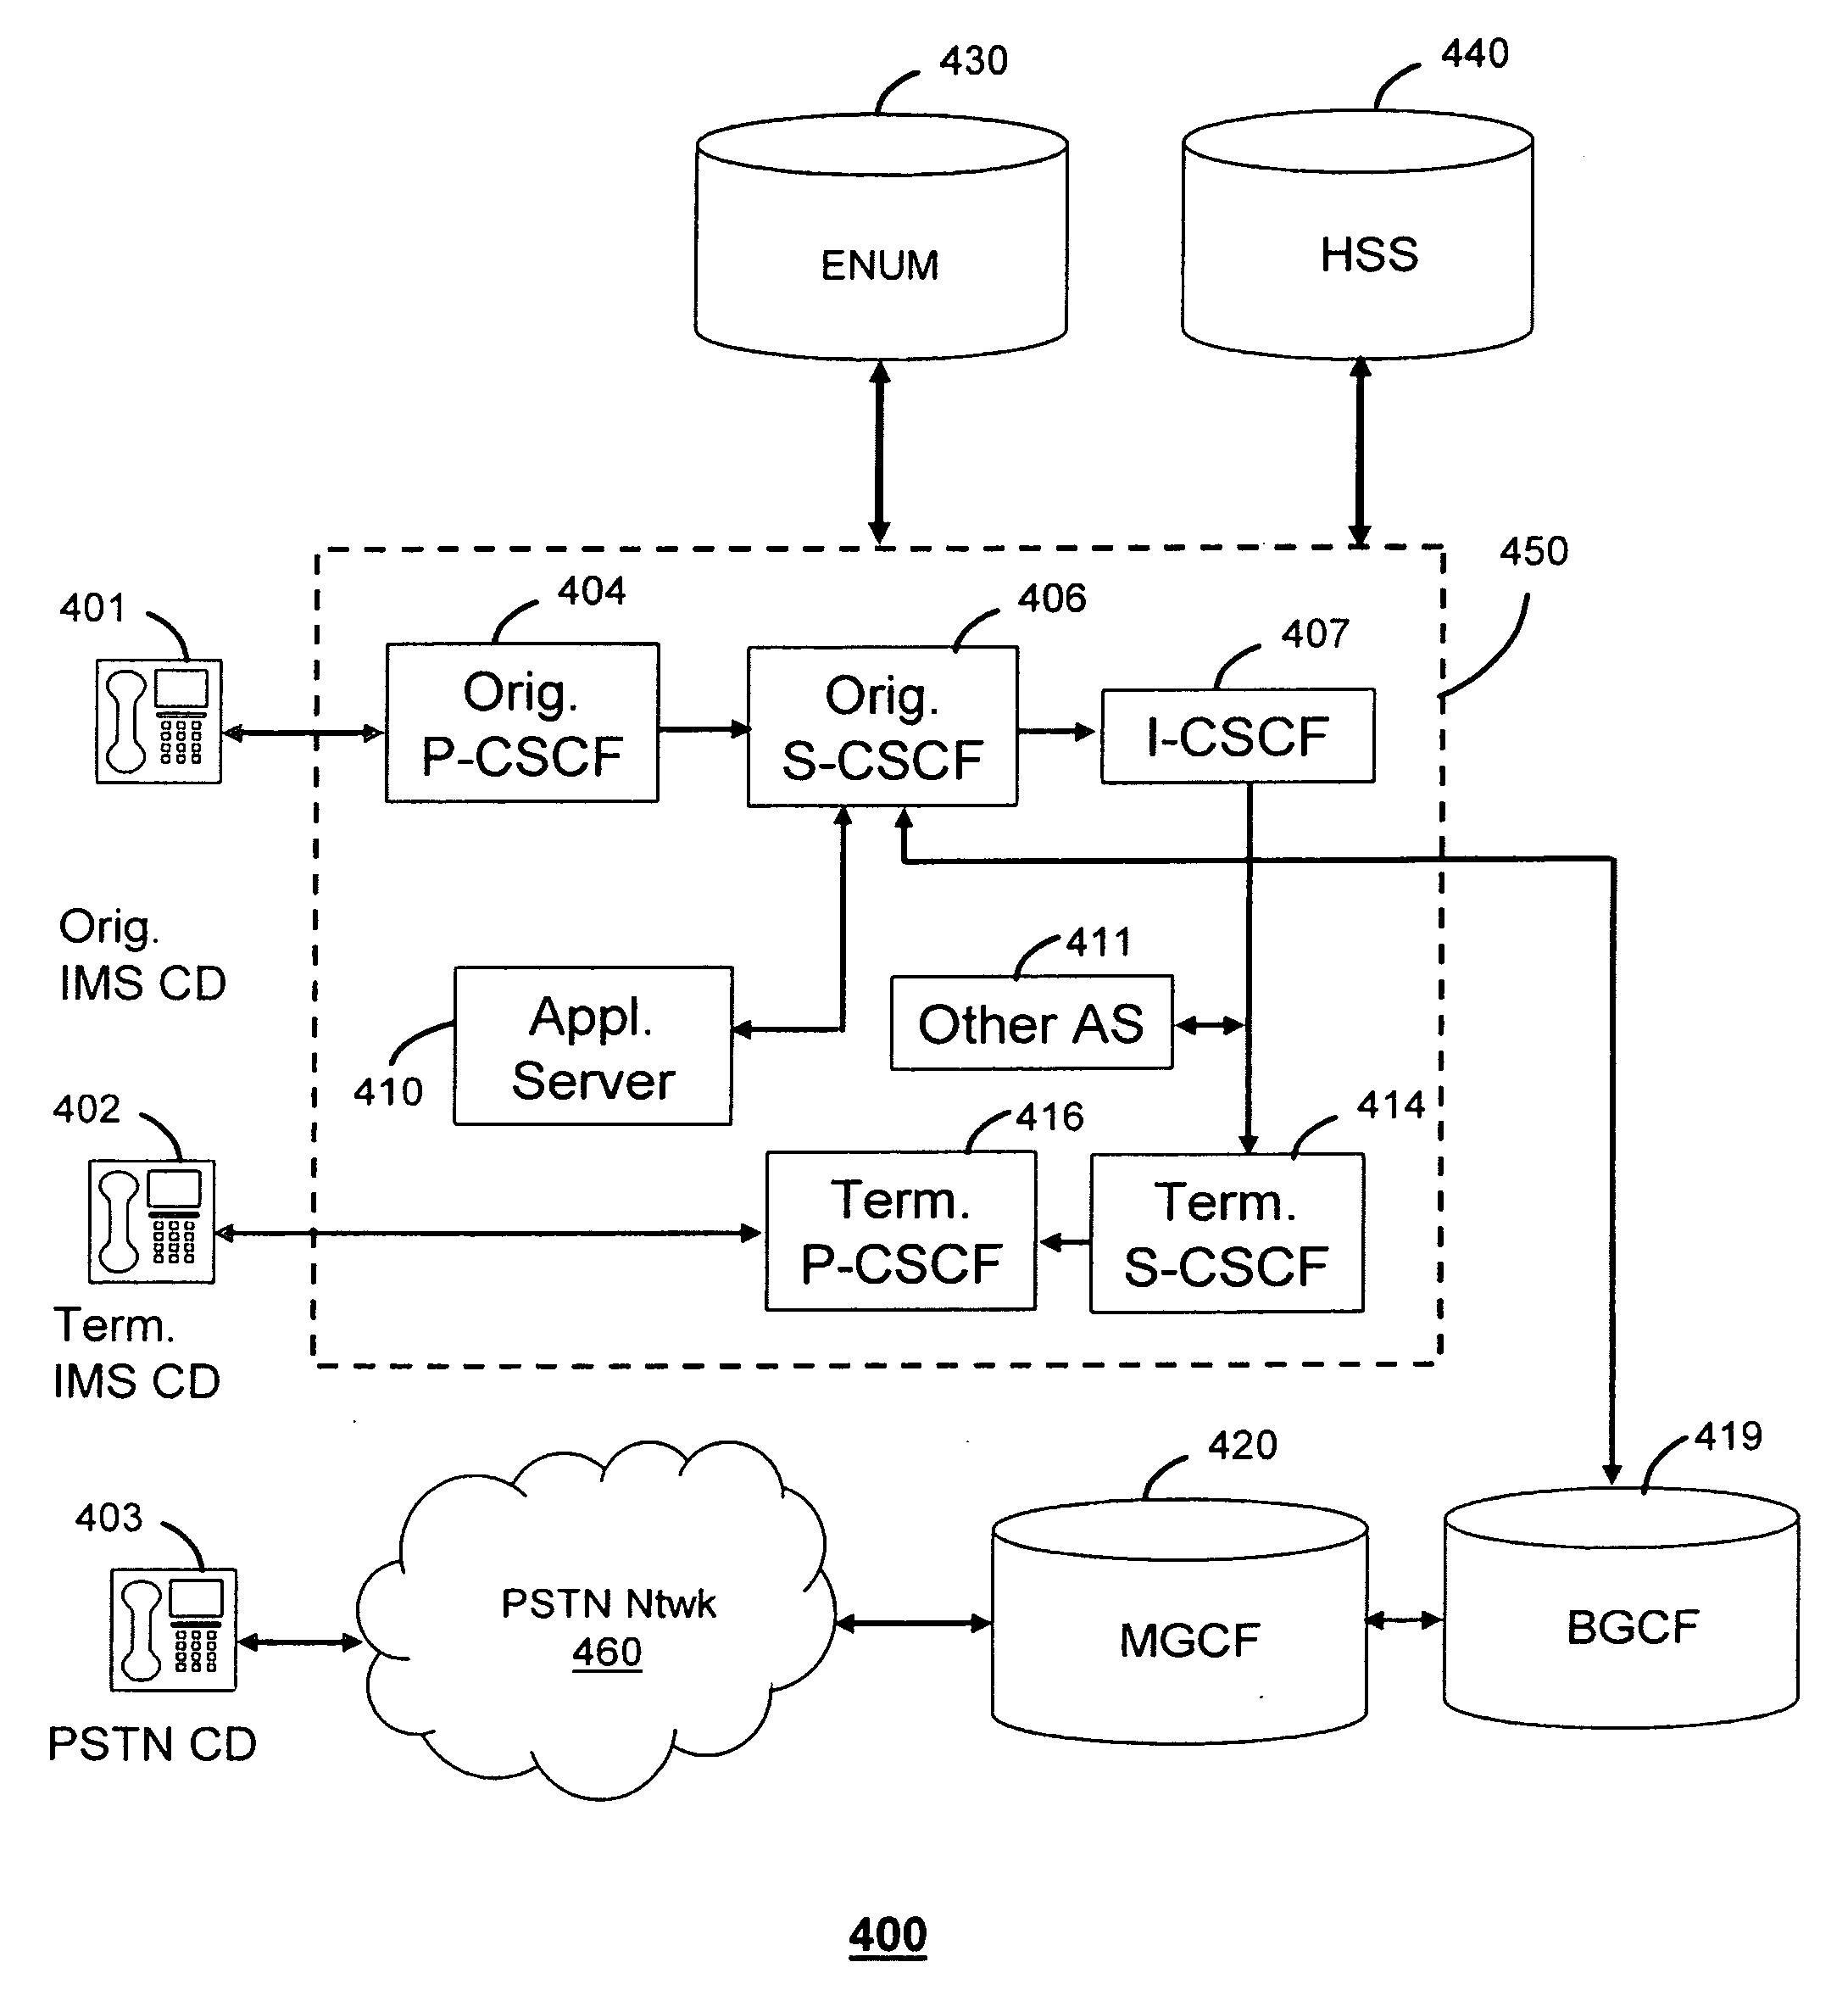 Method and apparatus for managing telephone communications